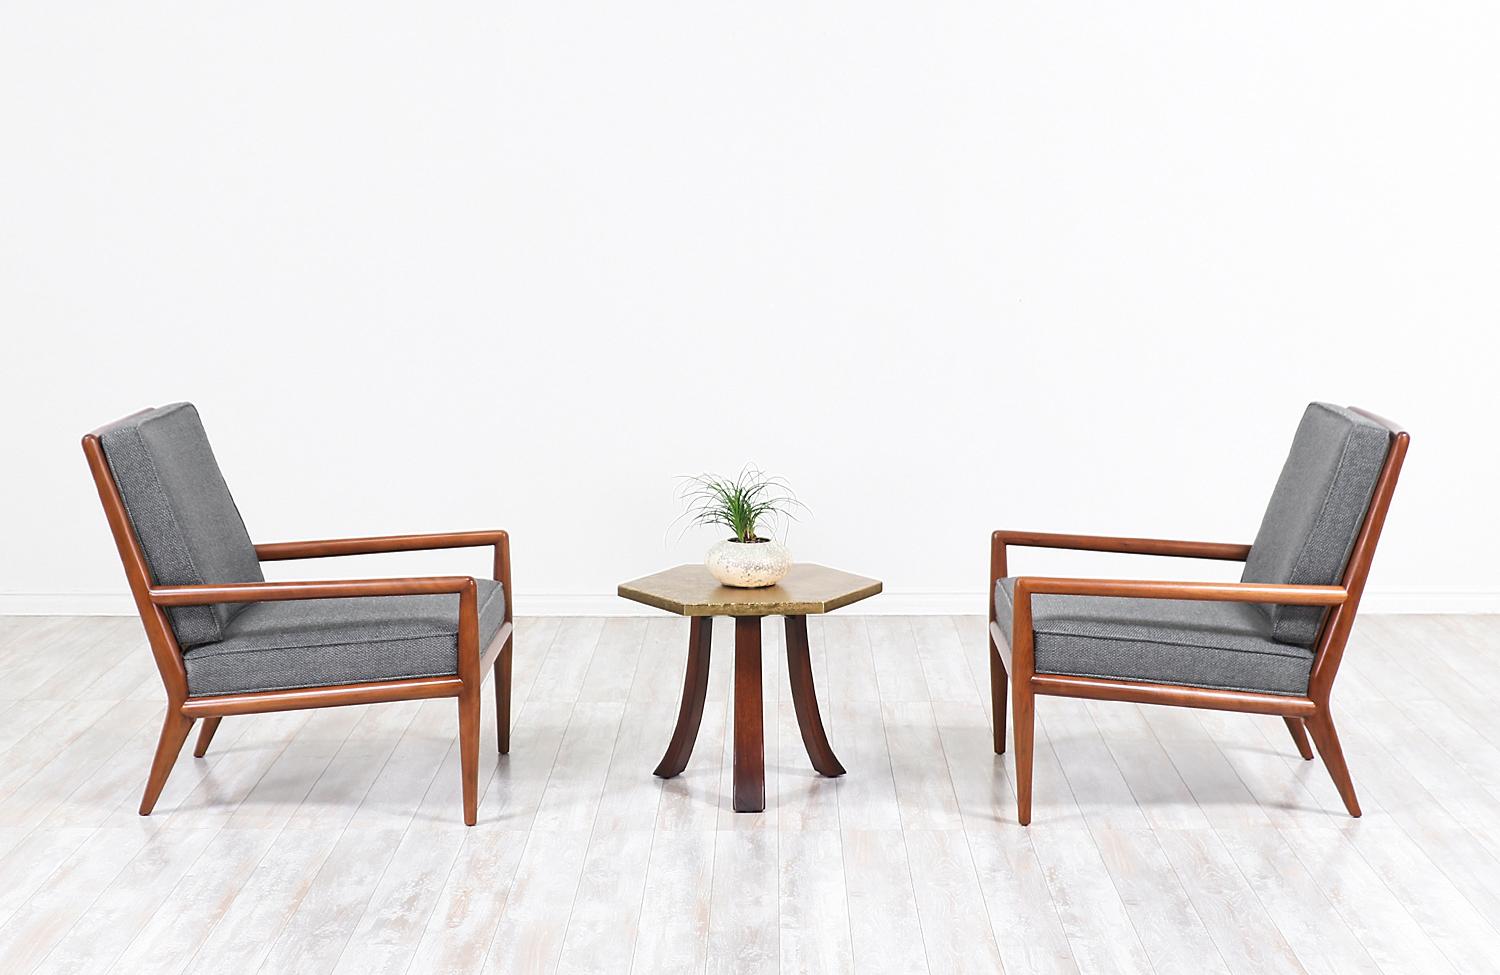 Elegant modern lounge chairs designed by T.H. Robsjohn-Gibbings for Widdicomb in the United States, circa 1950s. These midcentury ergonomic lounge chairs feature a solid walnut wood frame with angled legs and a slatted back, guaranteeing a handsome